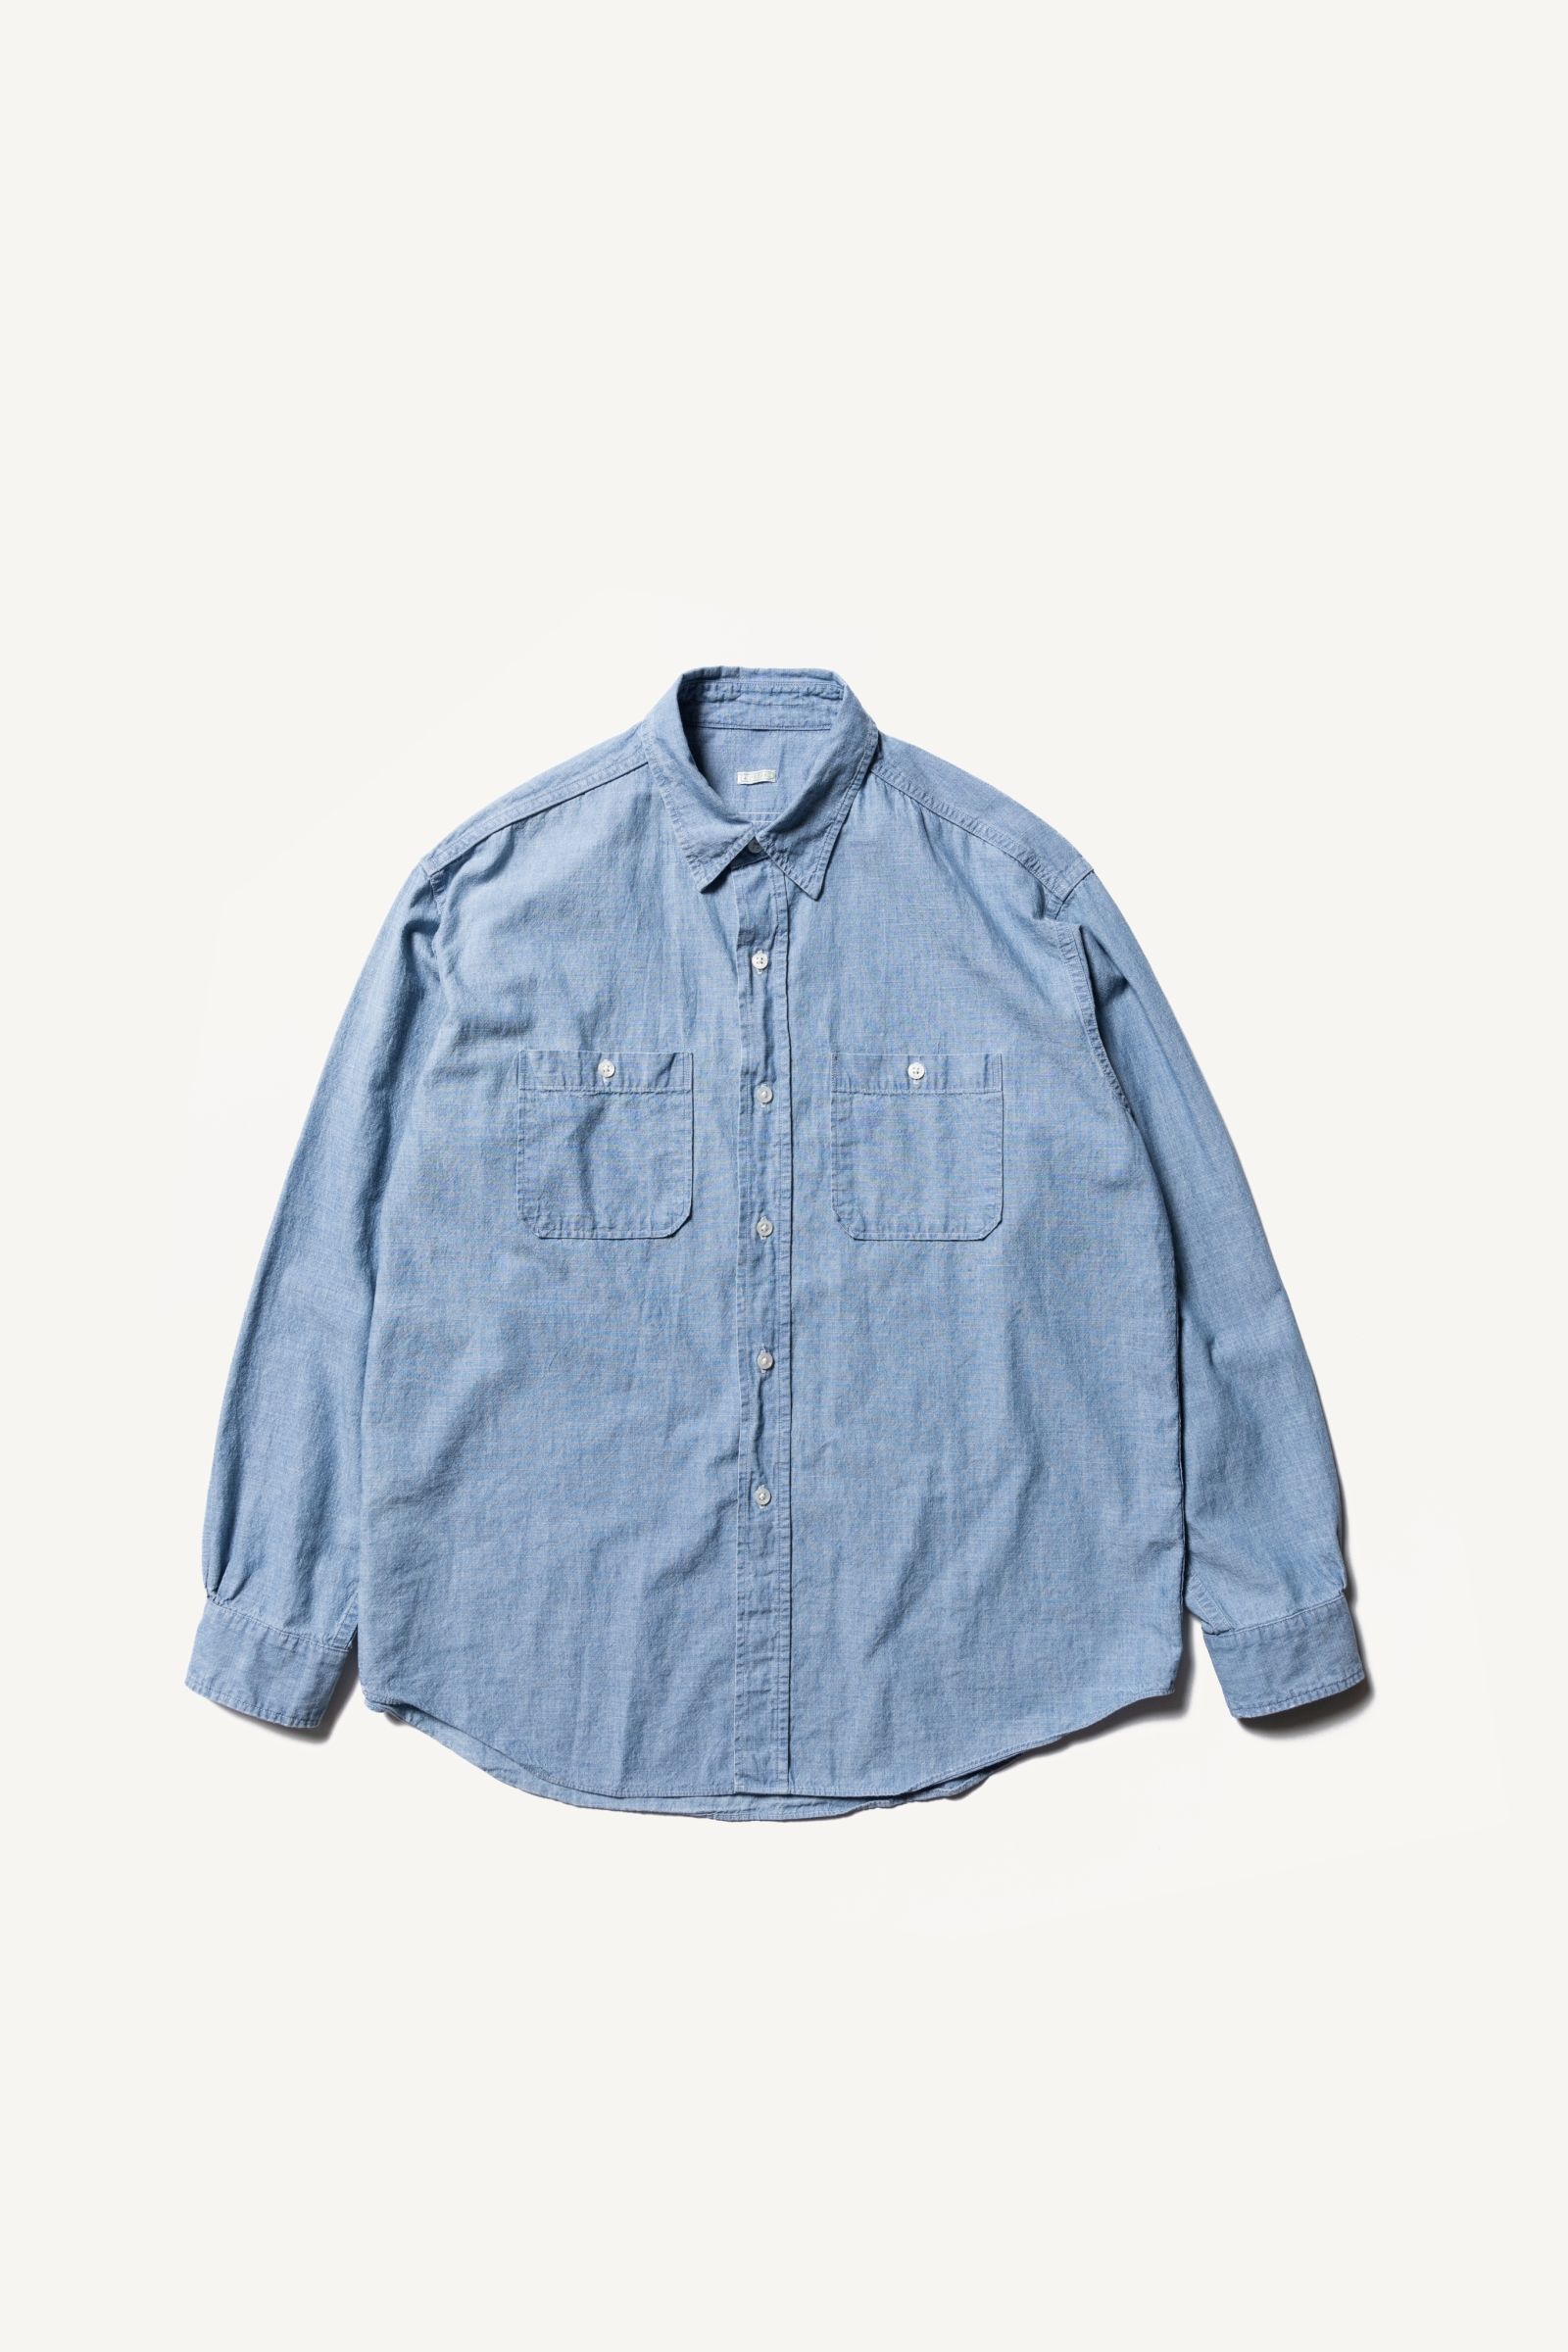 A.PRESSE アプレッセ Washed Chambray Shirt | www.causus.be